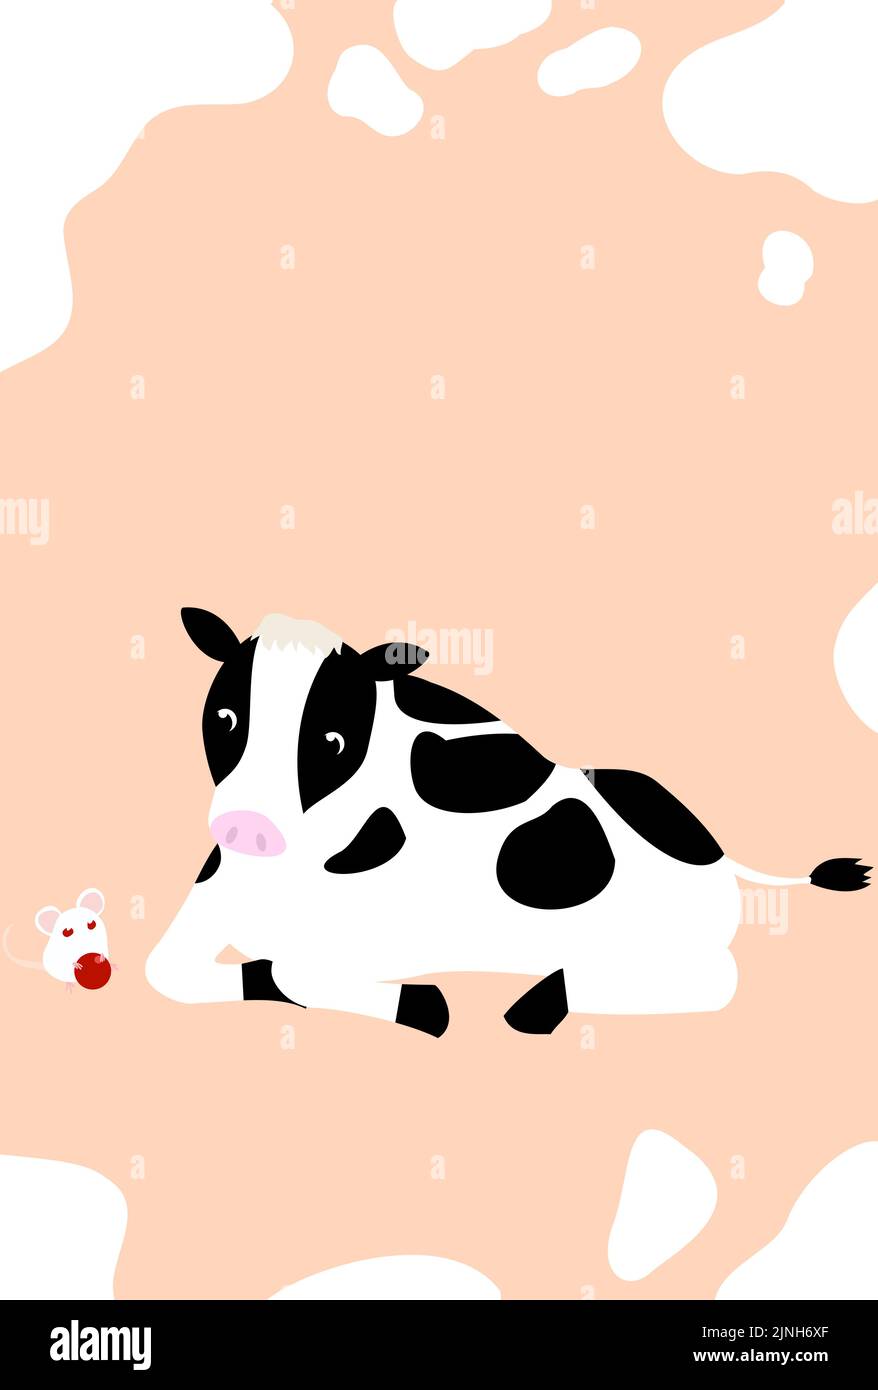 Holstein cow and mouse New Year's card illustration 2021 -Translation: Thank you for last year. Nice to meet you again this year. Stock Vector